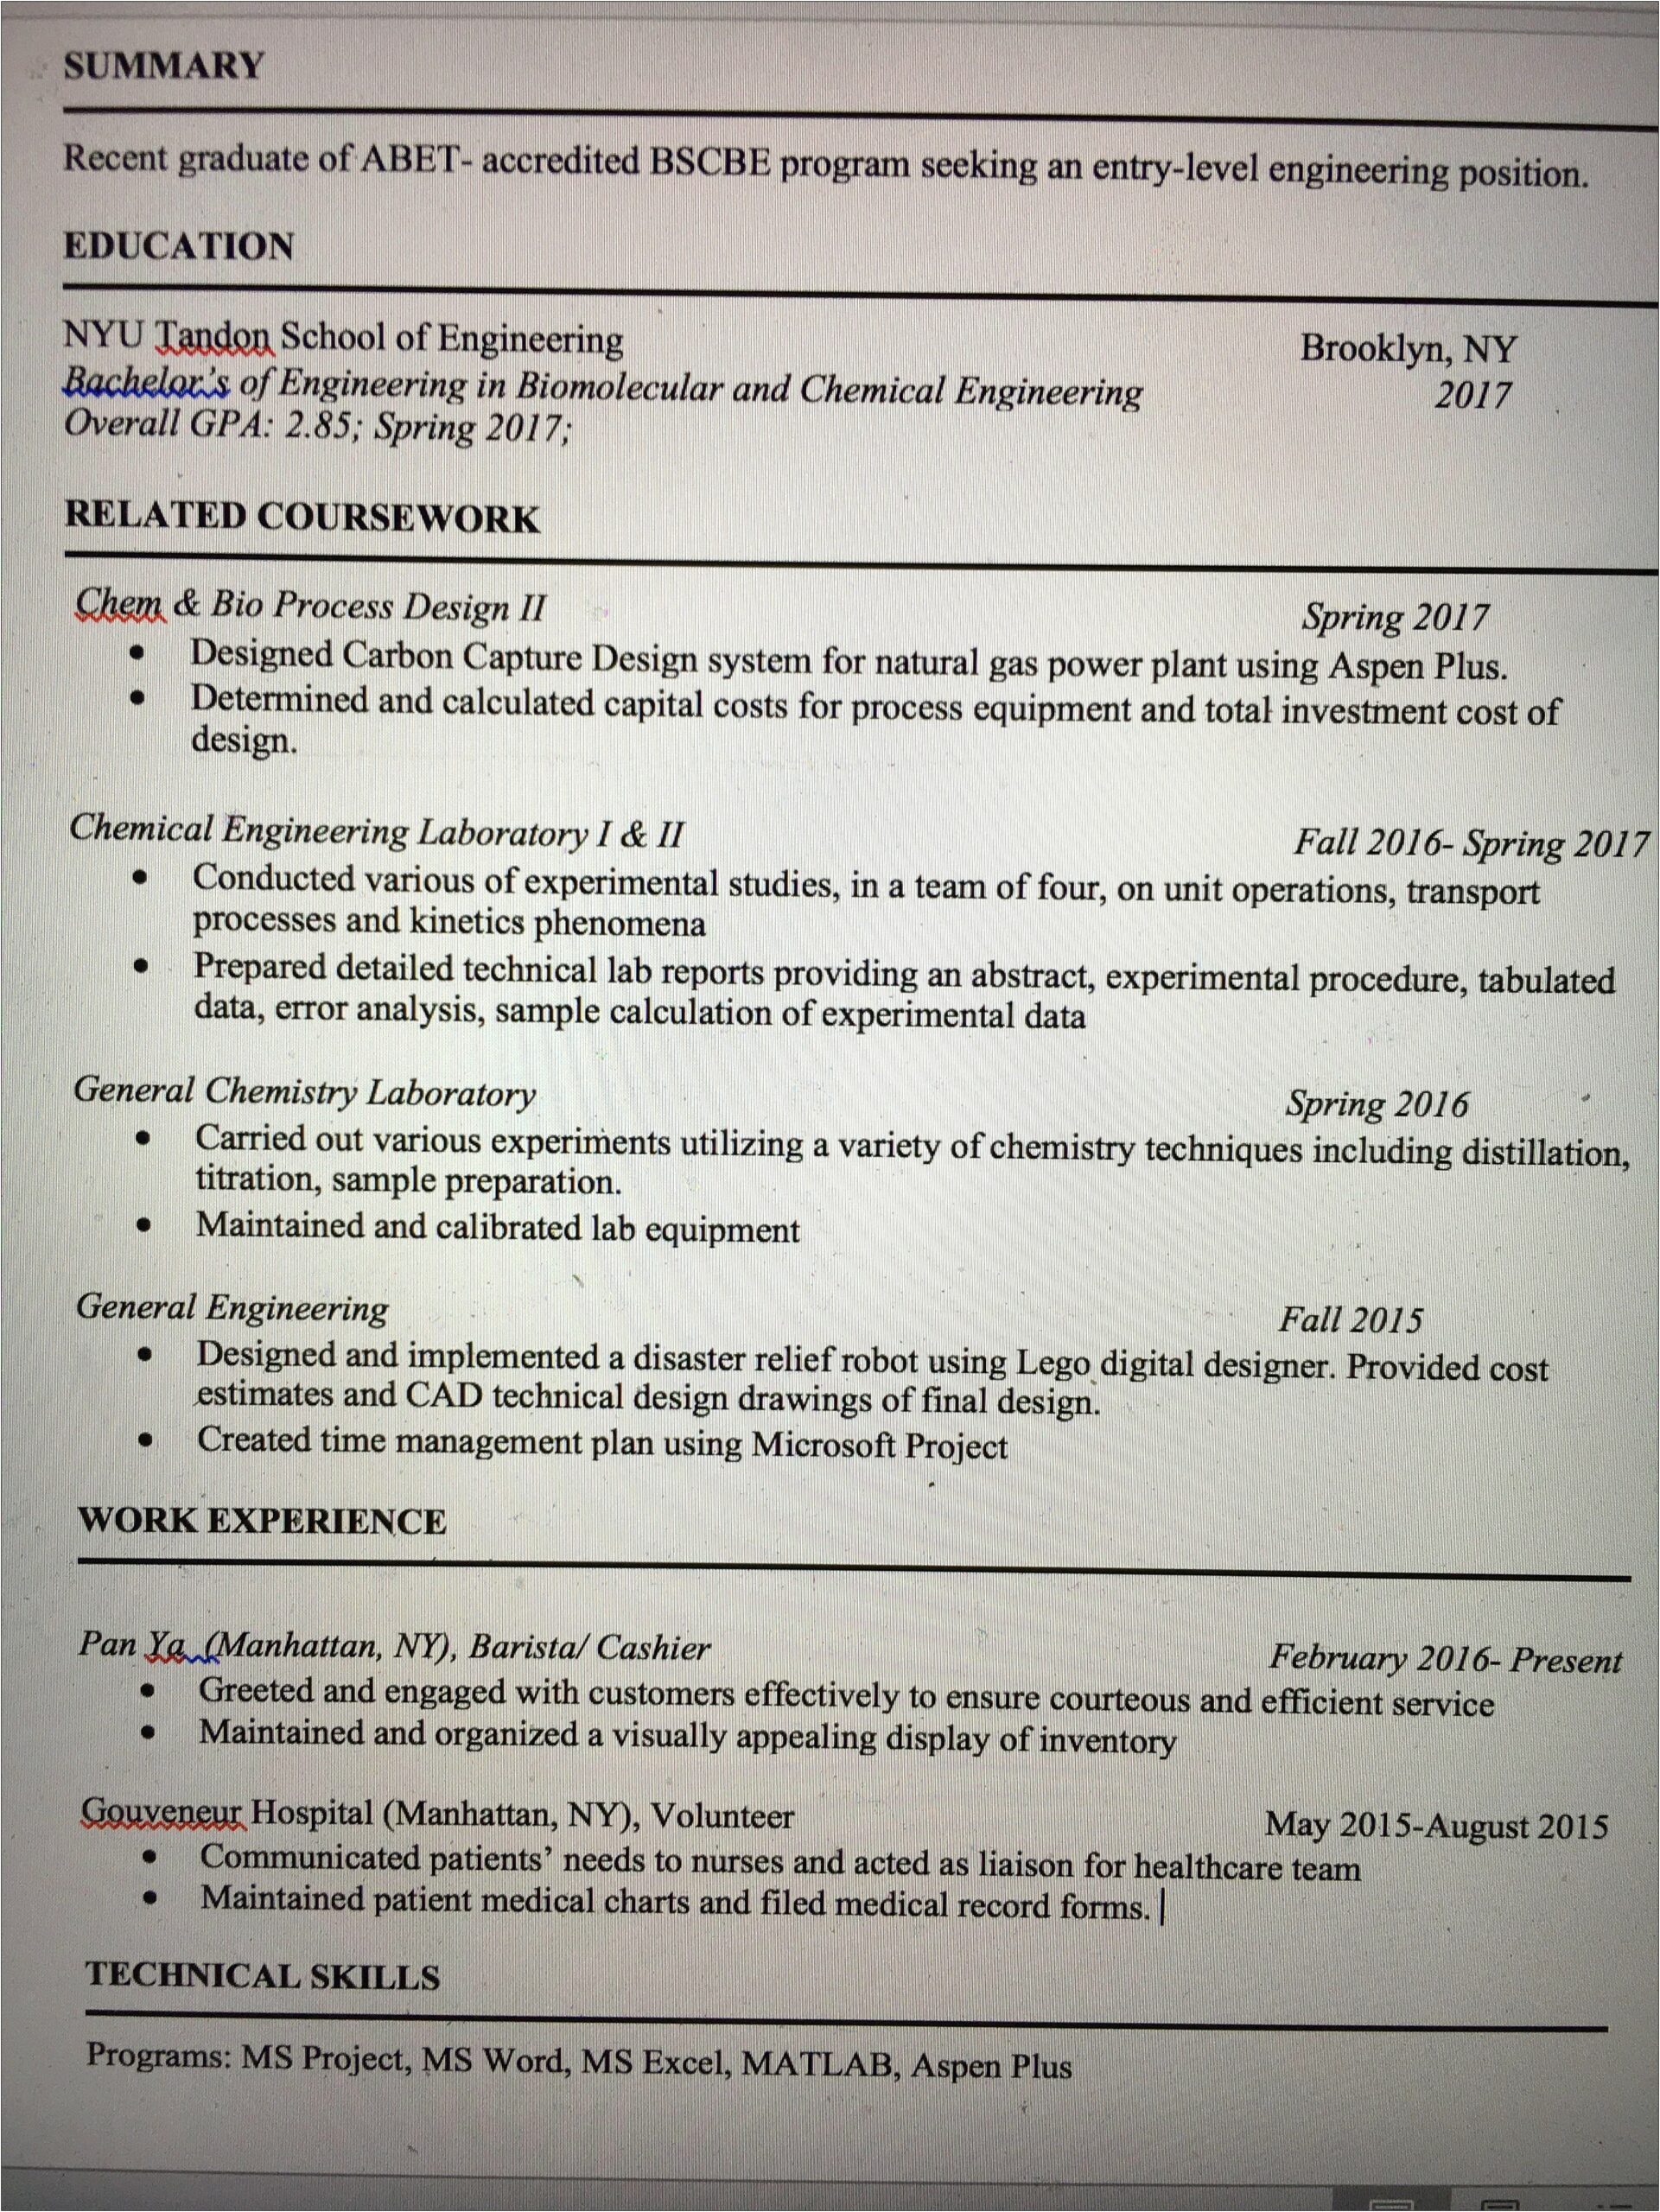 Resume Experience Of A Chemistry Majors